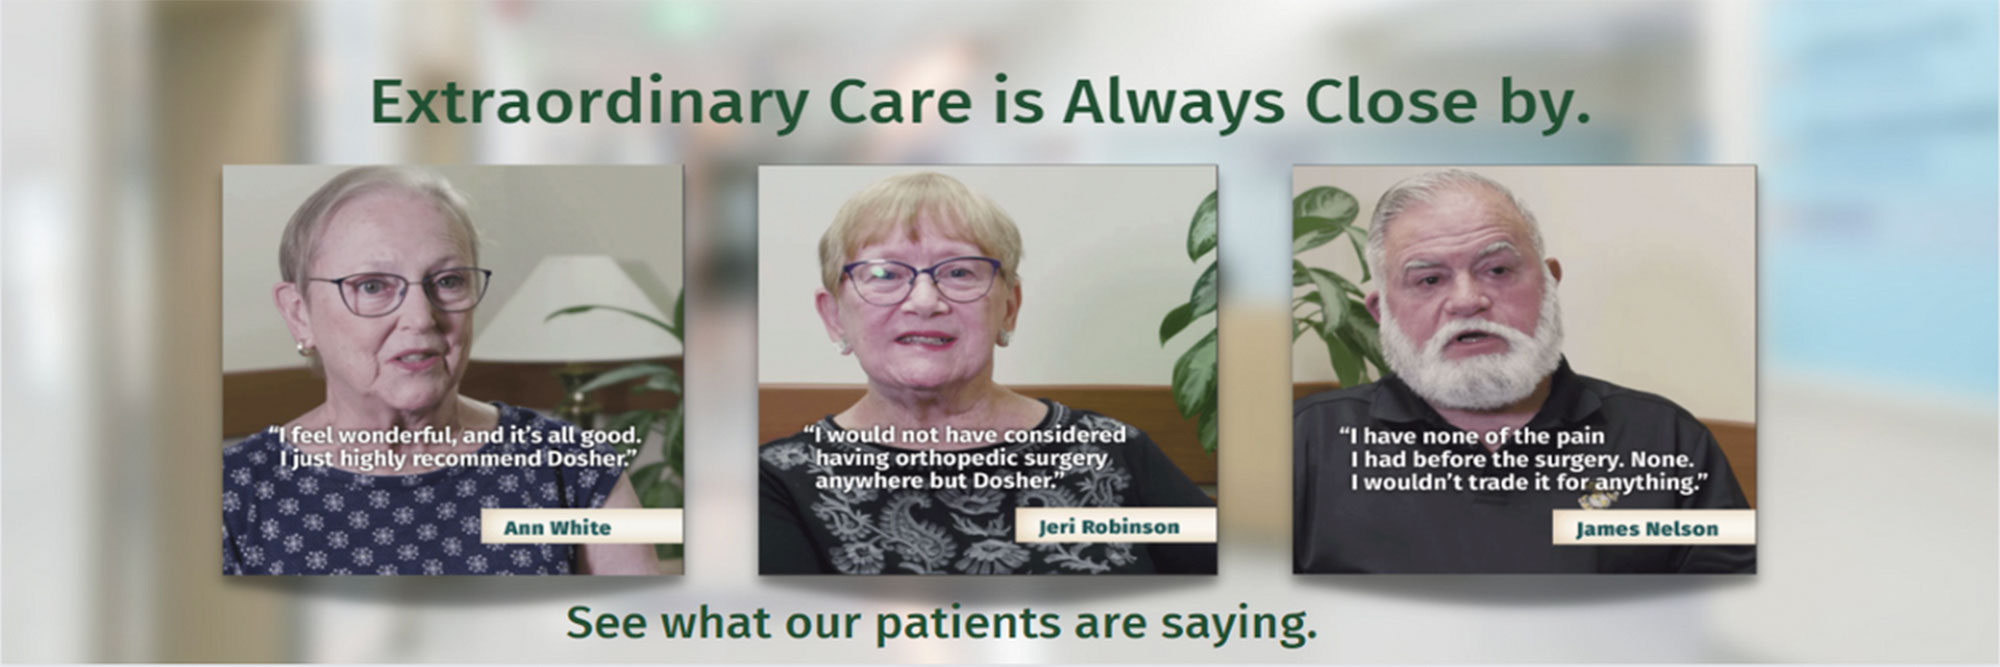 Extraordinary Care is Always Close by.

"I feel wonderful, and it's all good. I just left highly recommend Dosher." Ann White

"I would not have considered having orthopedic surgery anymore but Dosher." Jeri Robison

"I have none of the pain
I Had before the surgery. None,
I wouldn't trade it for anything."

James Nelson